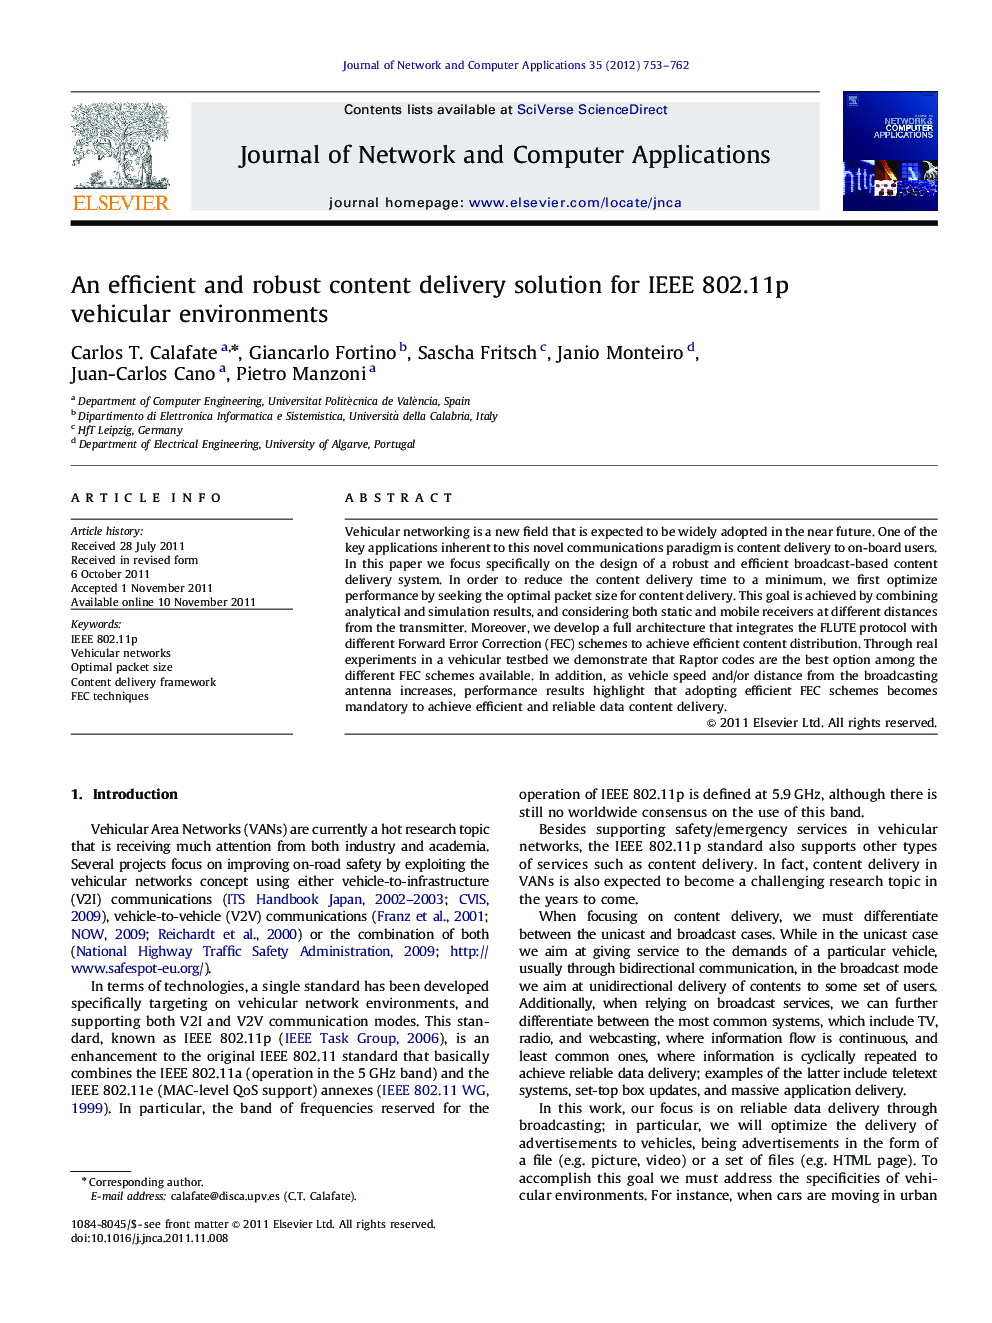 An efficient and robust content delivery solution for IEEE 802.11p vehicular environments